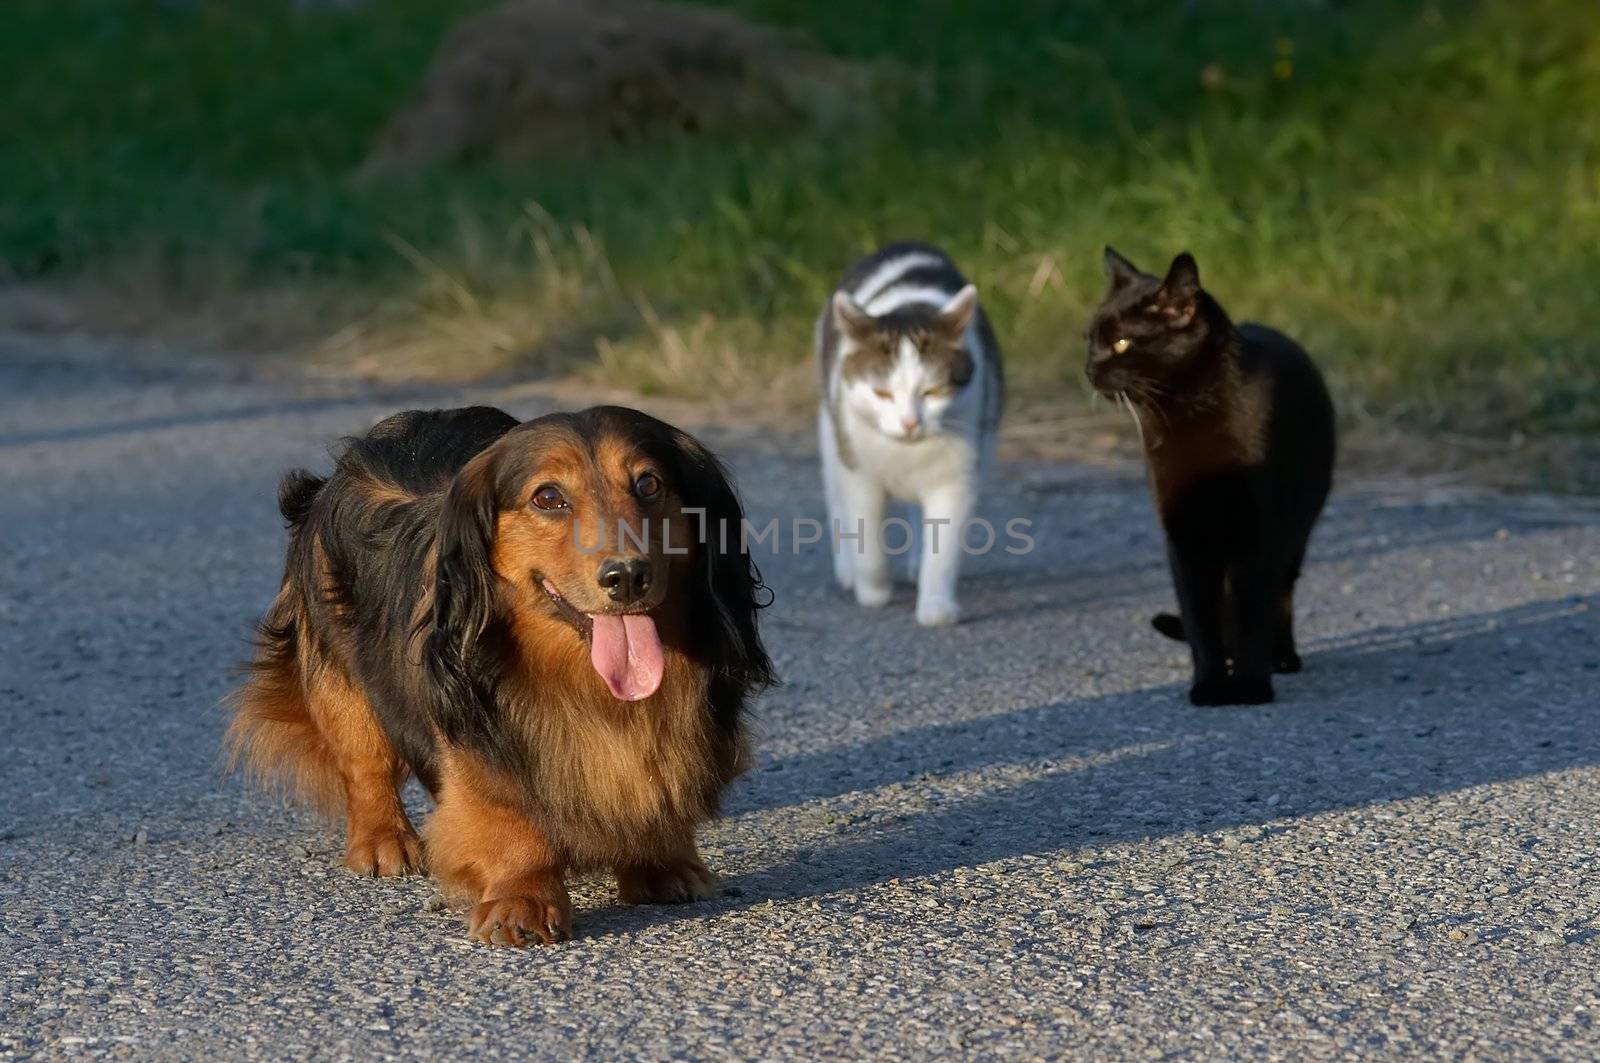 Snapshot of a dog and cats.